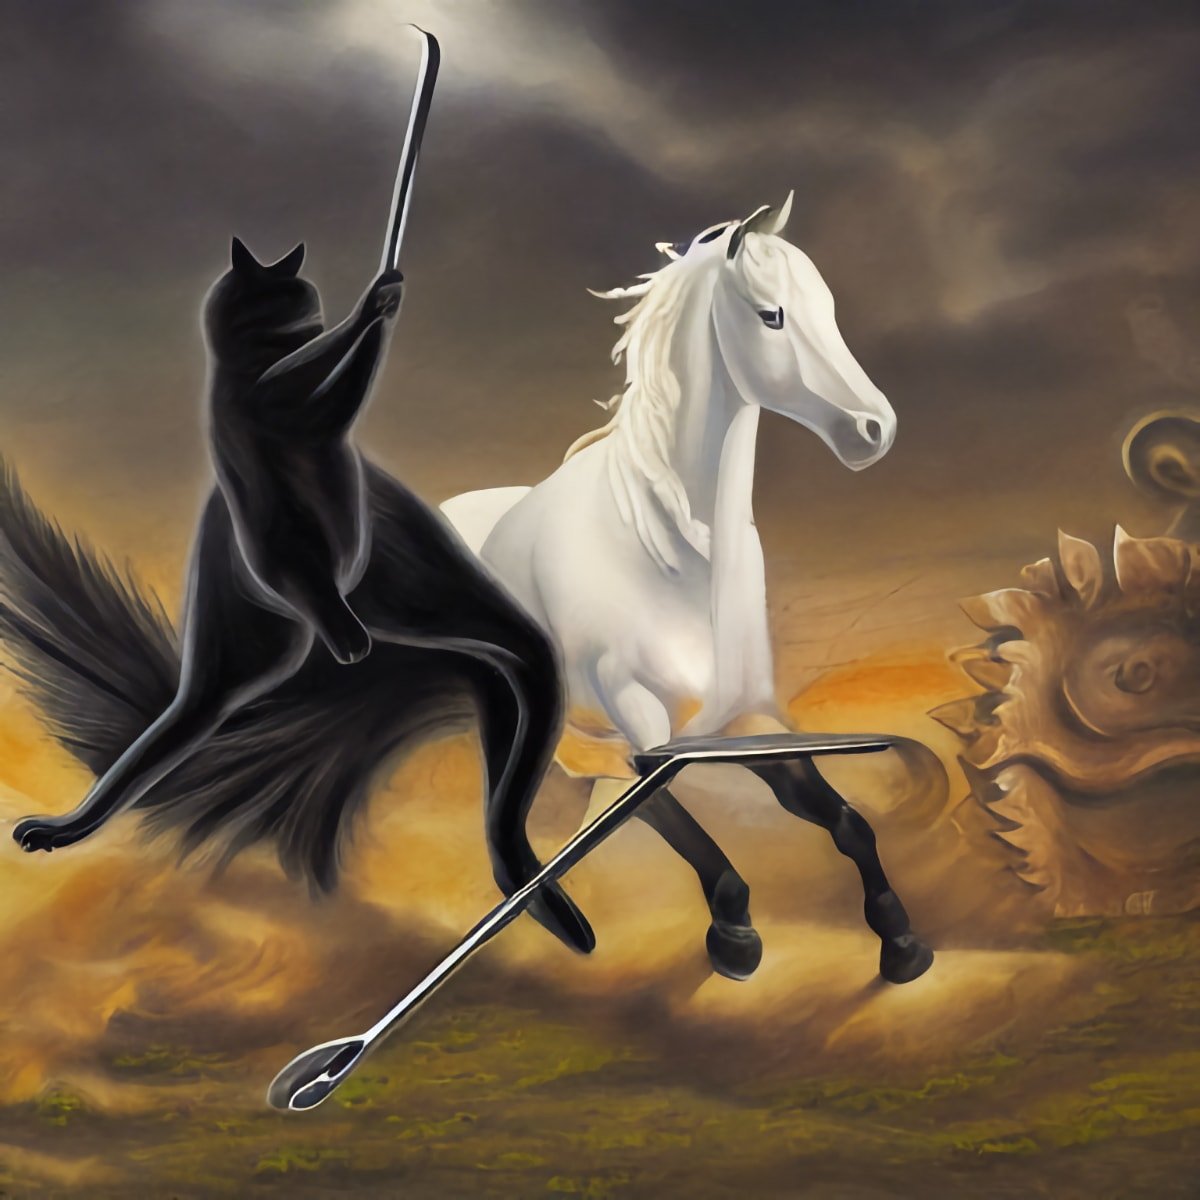 And I looked, and behold a pale horse: and his name that sat on him was Death Kitten, and Hell followed with him.